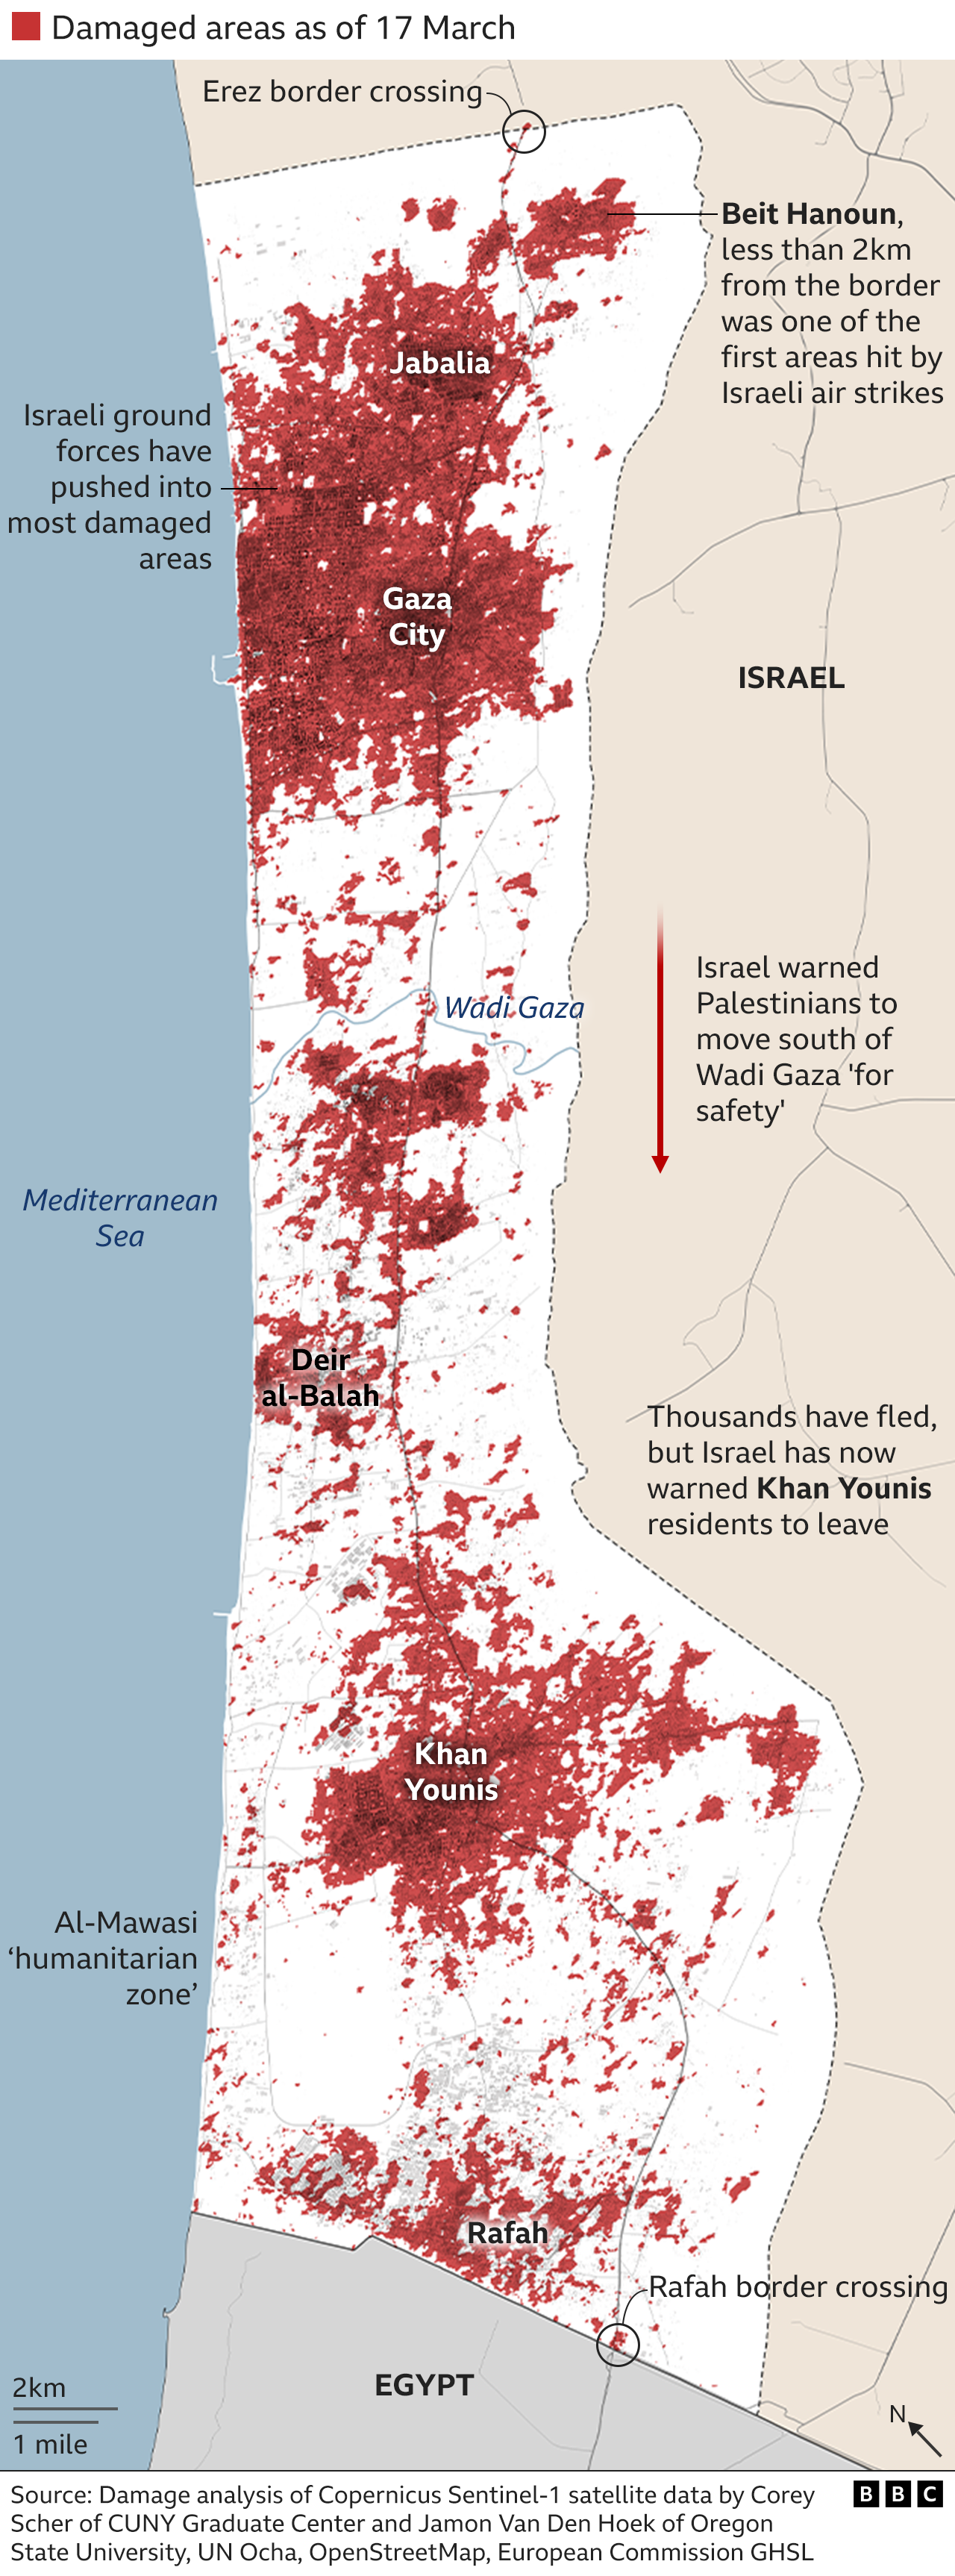 Map showing where buildings have been destroyed or damaged since the start of the conflict up to 17 March - with red areas for damage clearly visible across Gaza. Israel has told Palestinians to move out of areas in the north and around Khan Younis for their own safety.